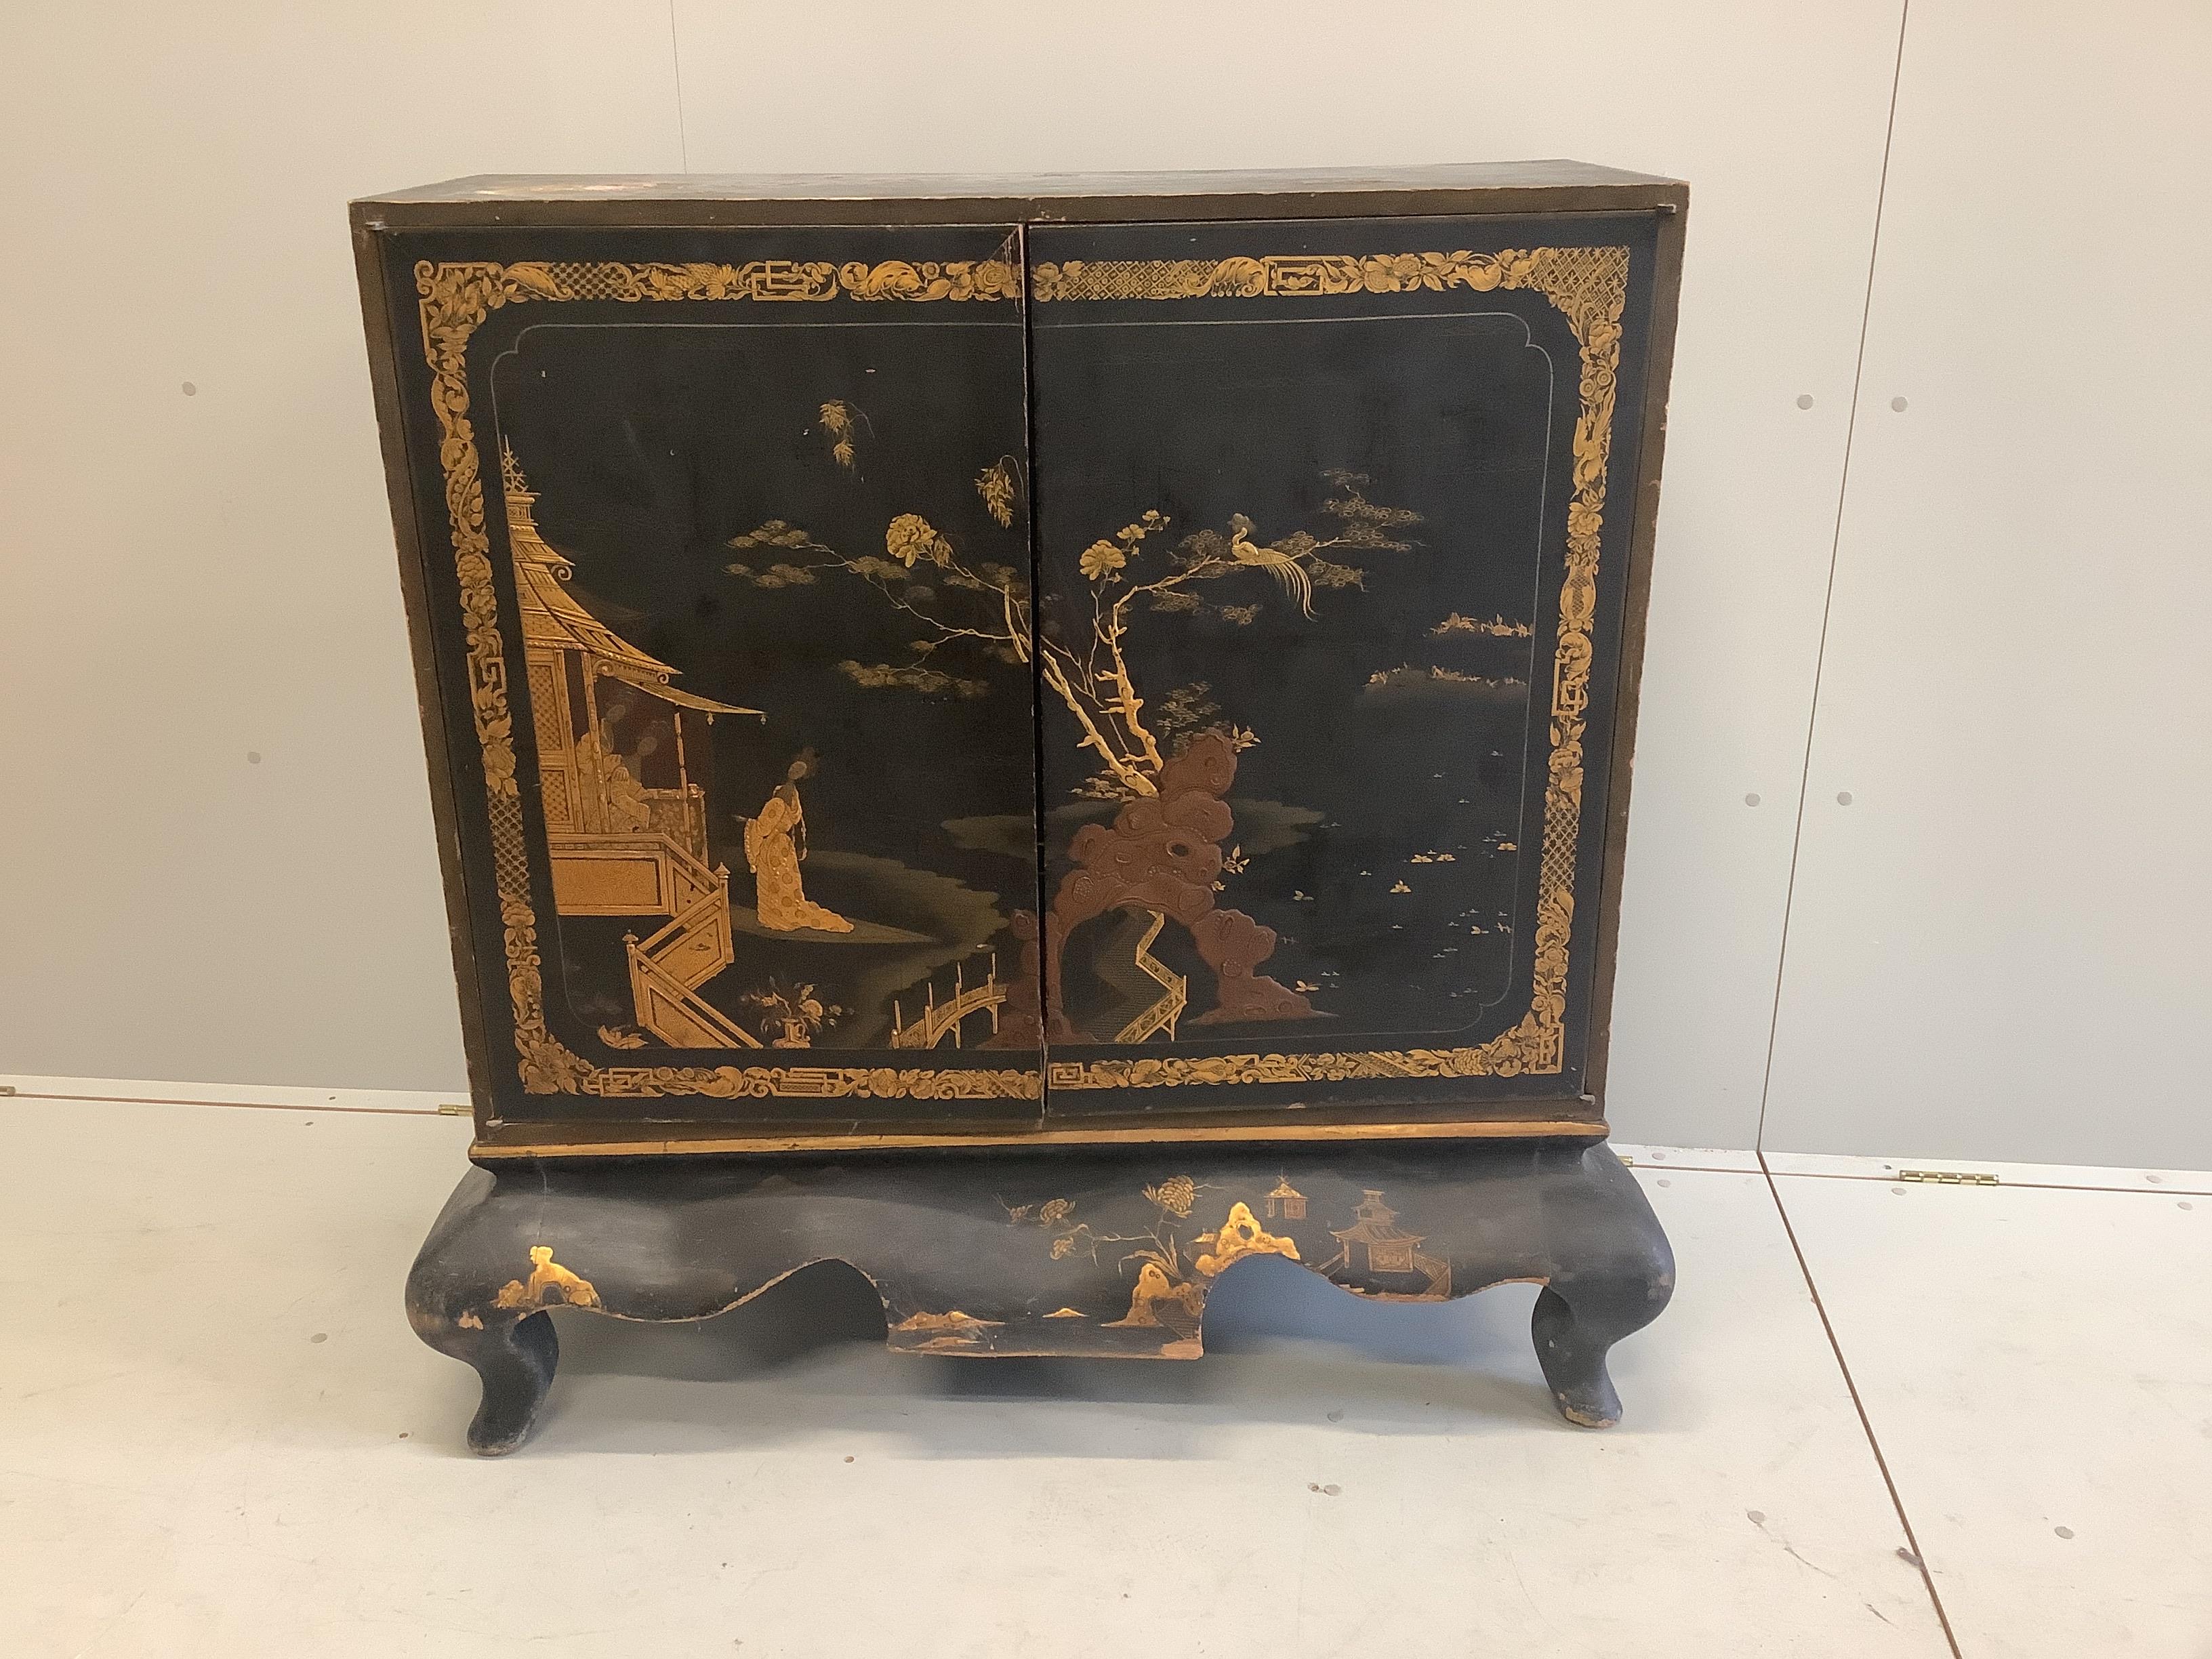 A 19th century Japanese lacquer cabinet, width 120cm, depth 48cm, height 113cm